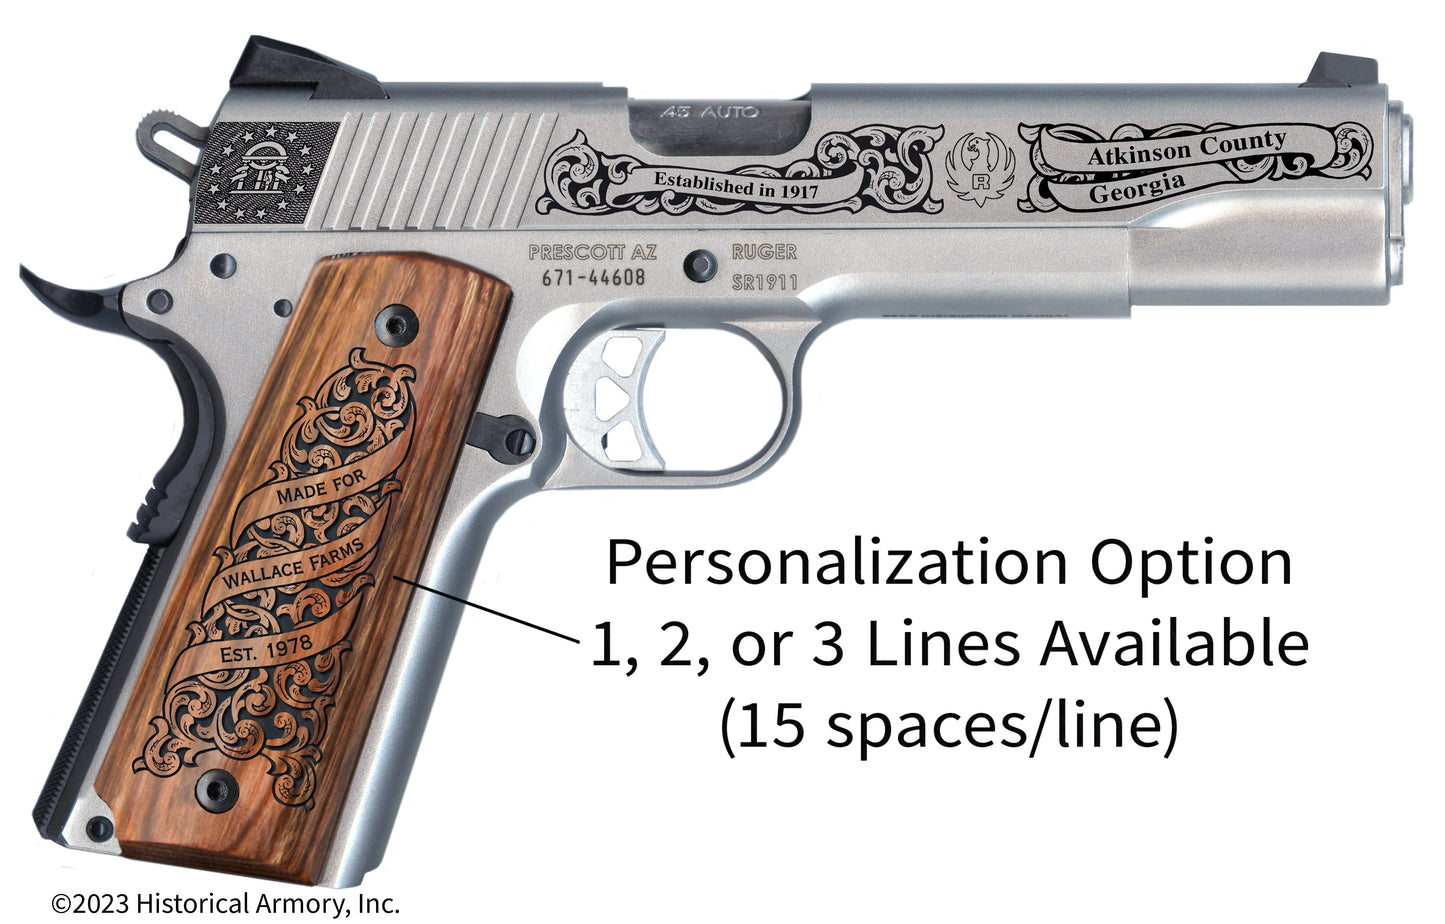 Atkinson County Georgia Personalized Engraved .45 Auto Ruger 1911